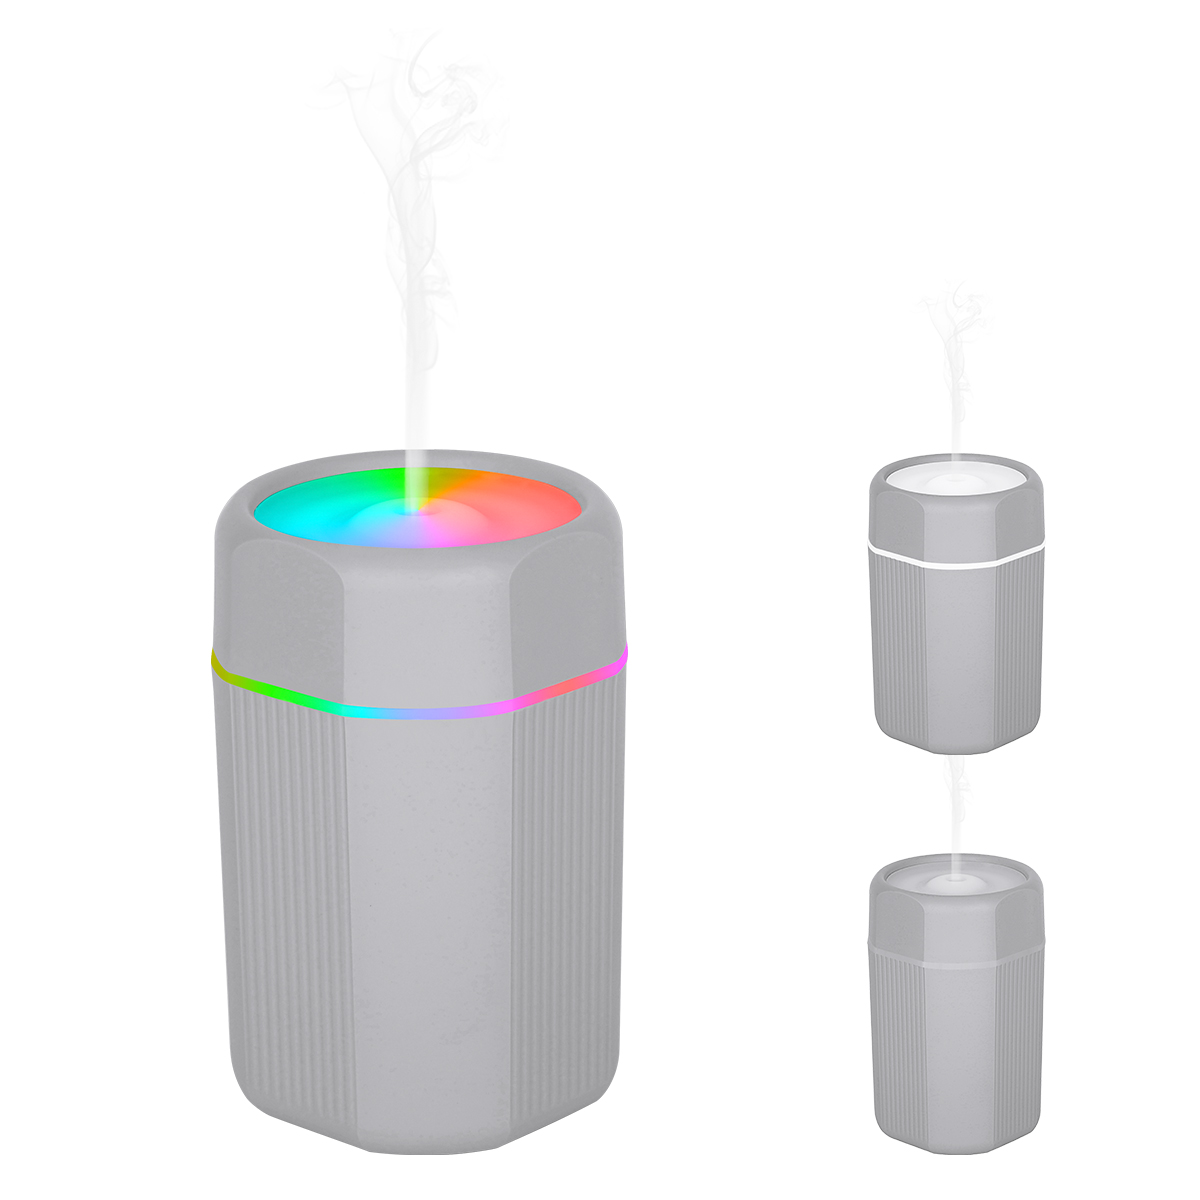 Portable Essential Oil Diffuser, USB Powered Aroma Diffuser with RGB LED Light for Home Office, 3 Mode Waterless Auto-Off Essential Oil Aromatherapy Diffuser Cool Mist Humidifier for Home Bedroom